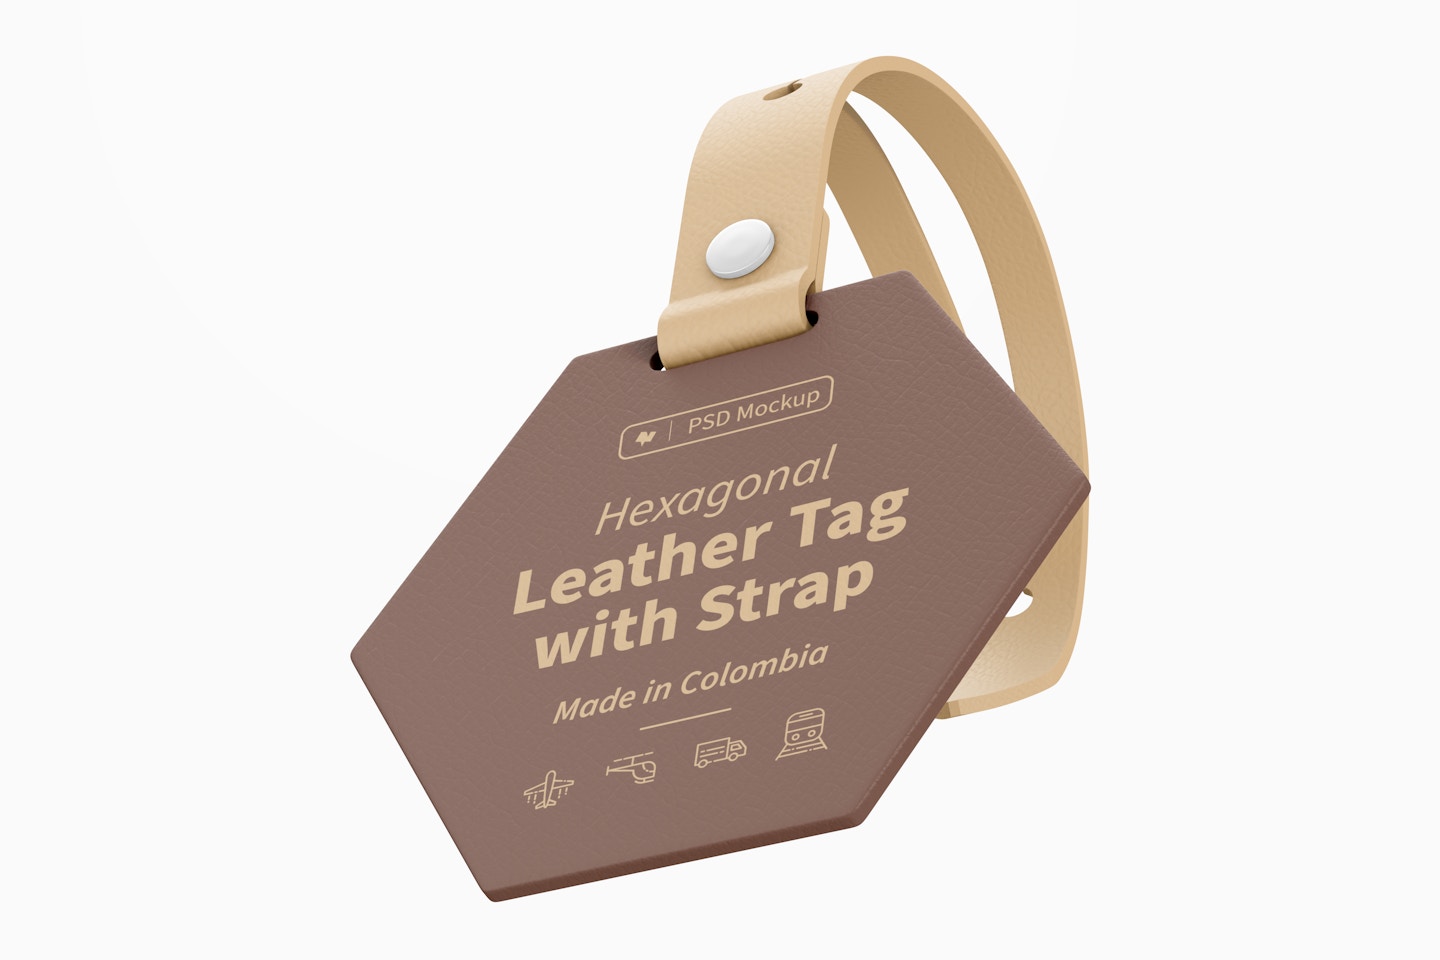 Hexagonal Leather Tag with Strap Mockup, Floating